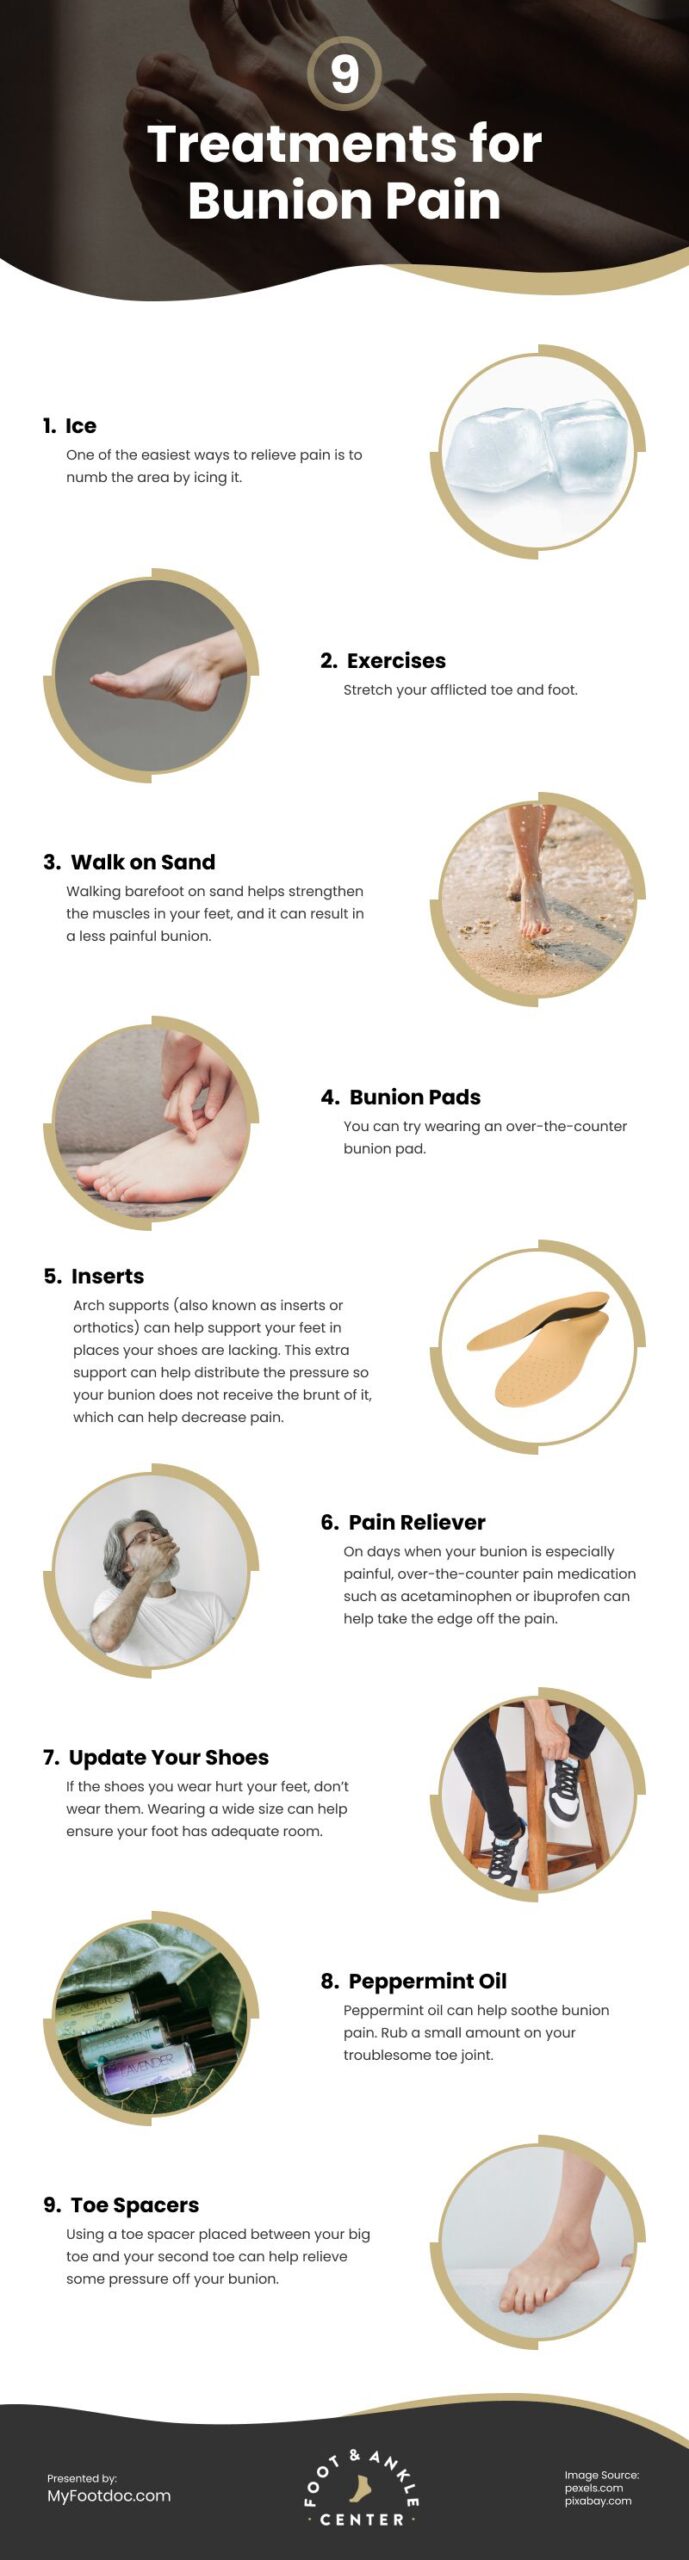 9 Treatments for Bunion Pain Infographic